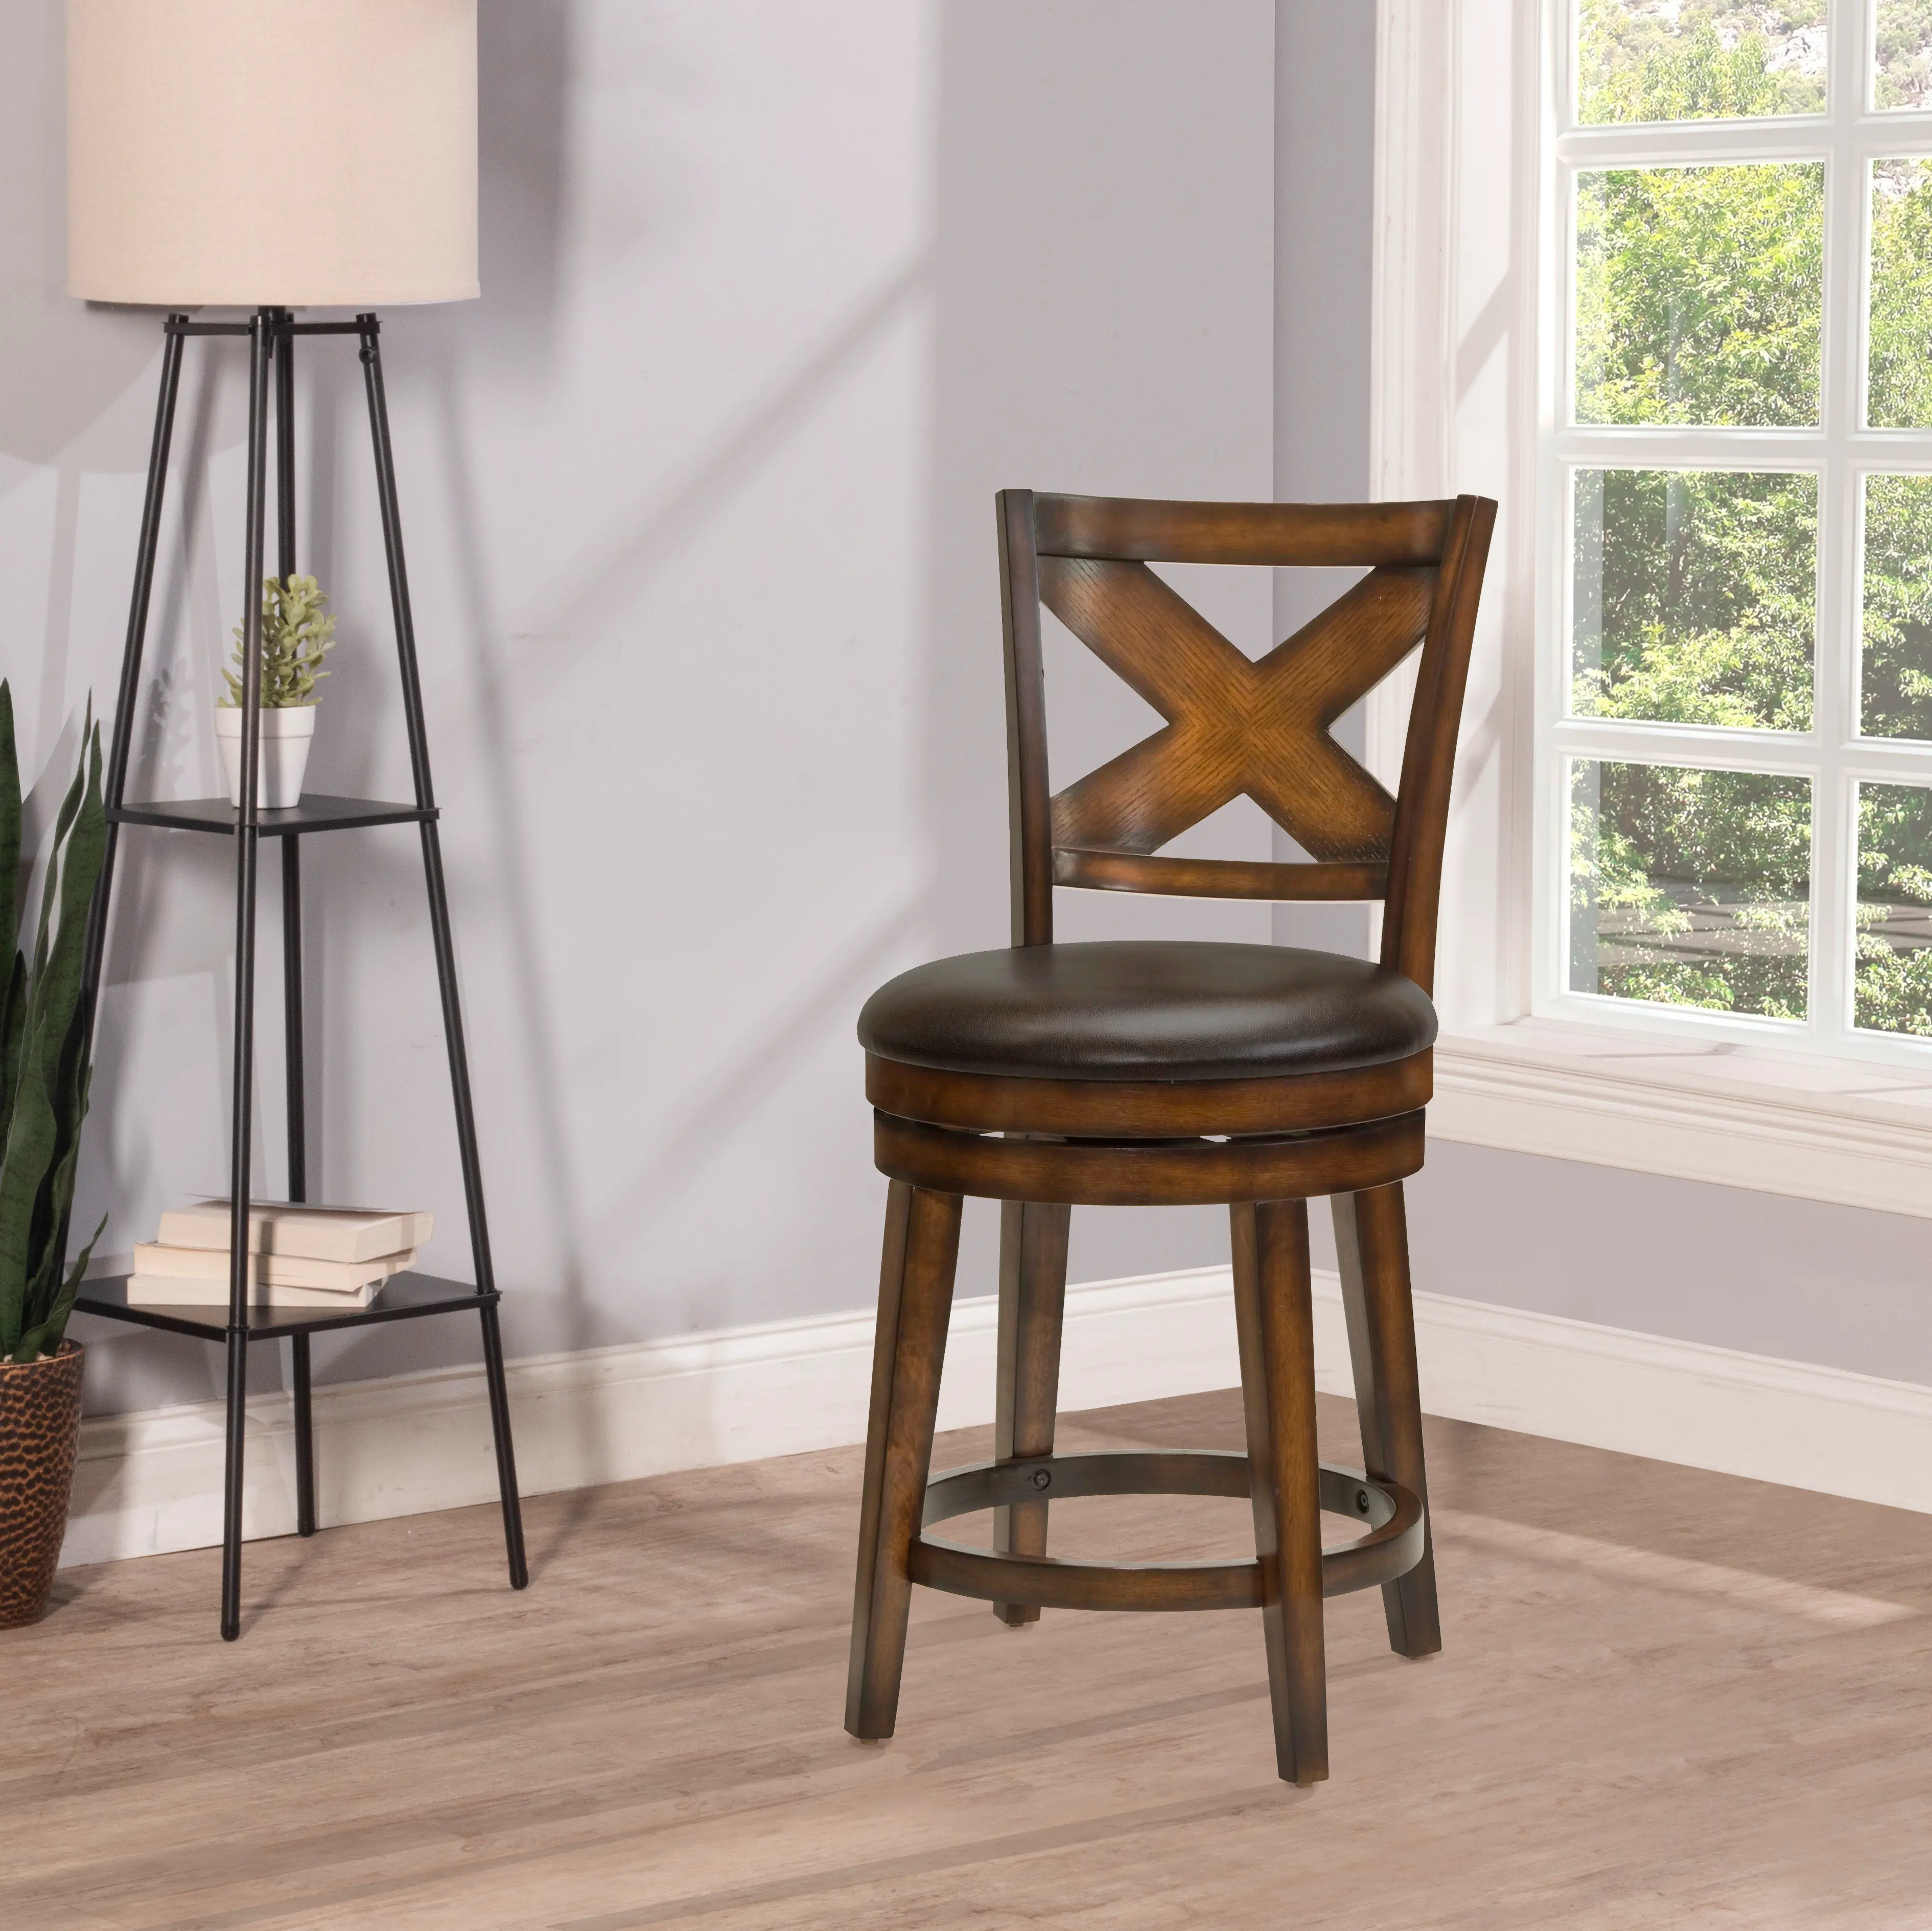 Sunhill Traditional Rustic Oak Swivel Counter Height Stool